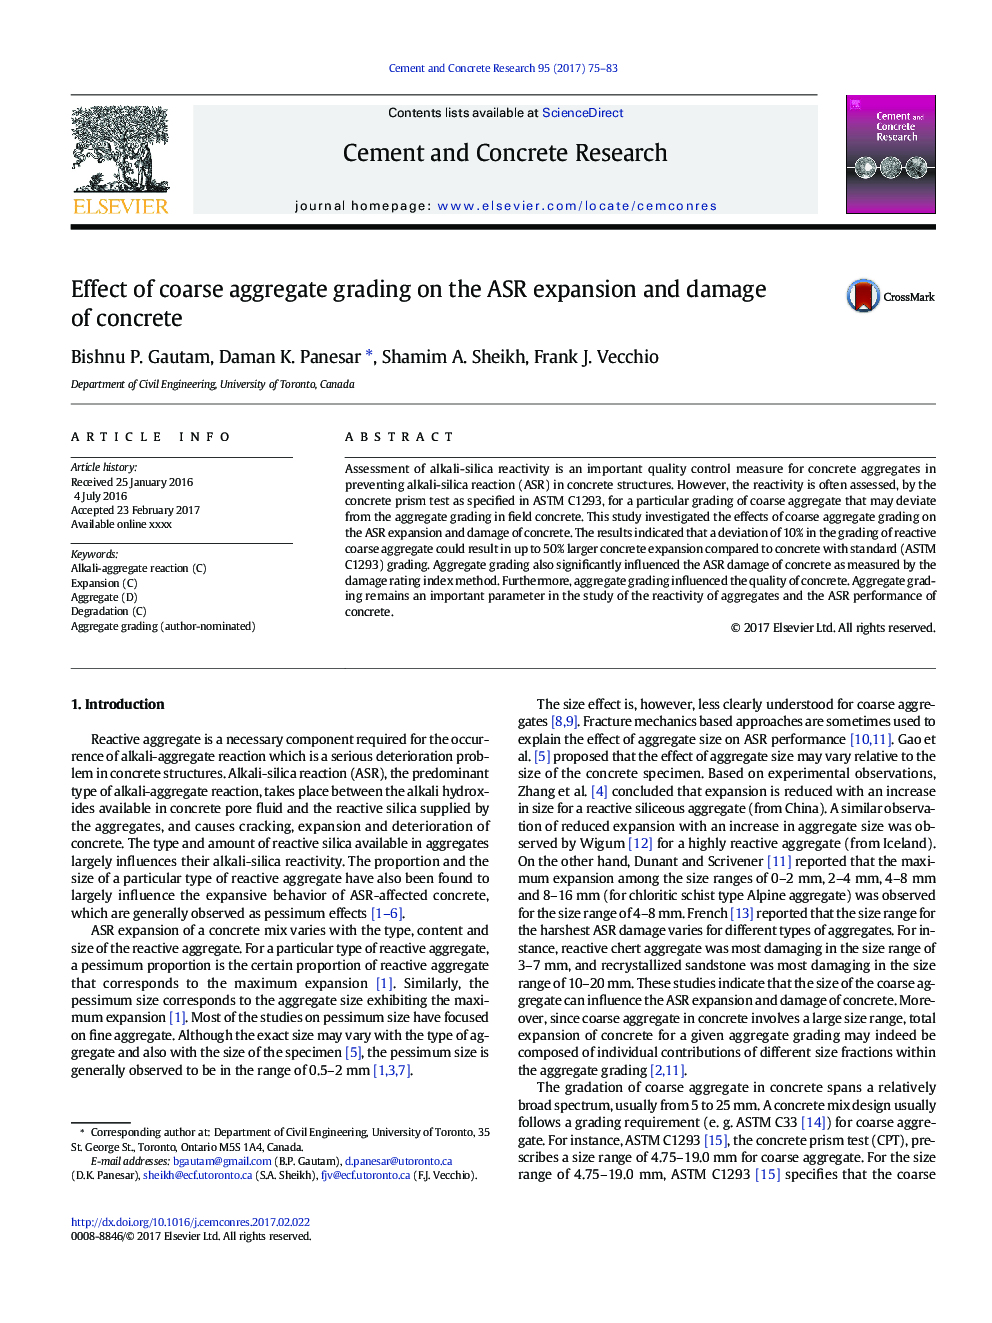 Effect of coarse aggregate grading on the ASR expansion and damage of concrete